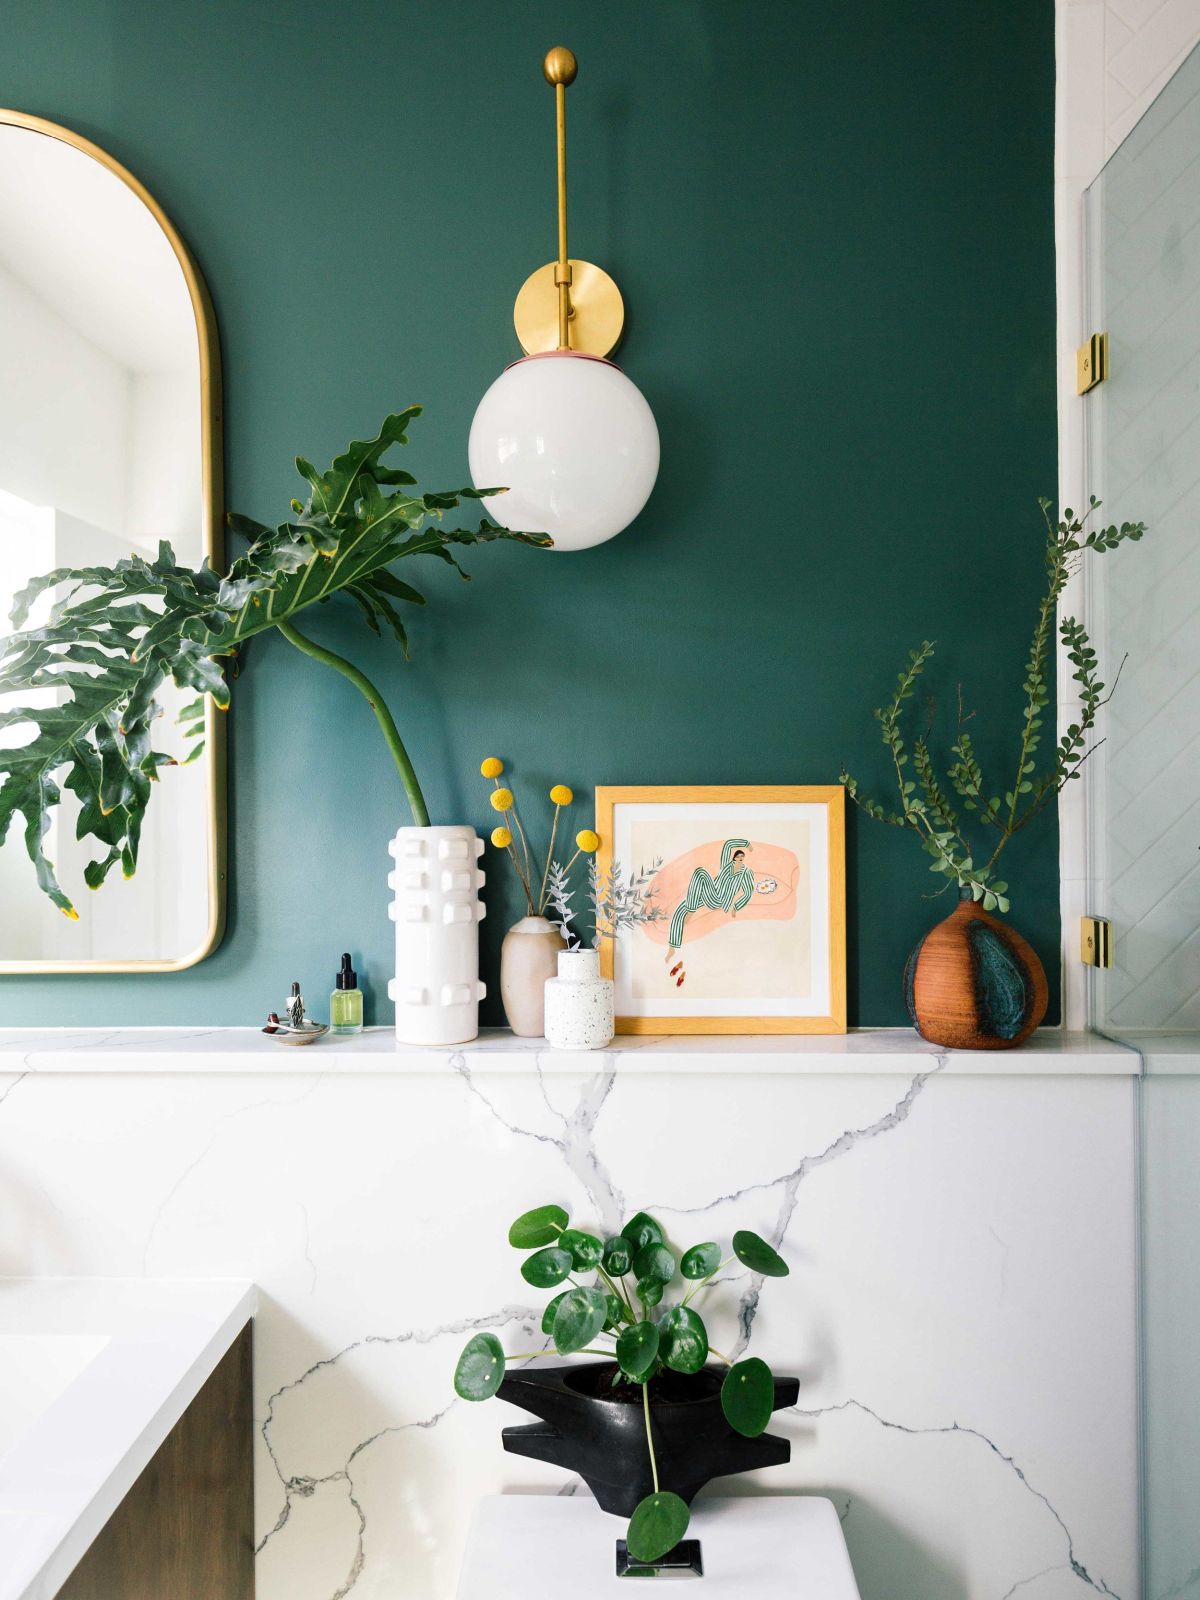 Green wall bathroom, the concept of bringing nature indoors has gained widespread popularity in interior design, with green walls